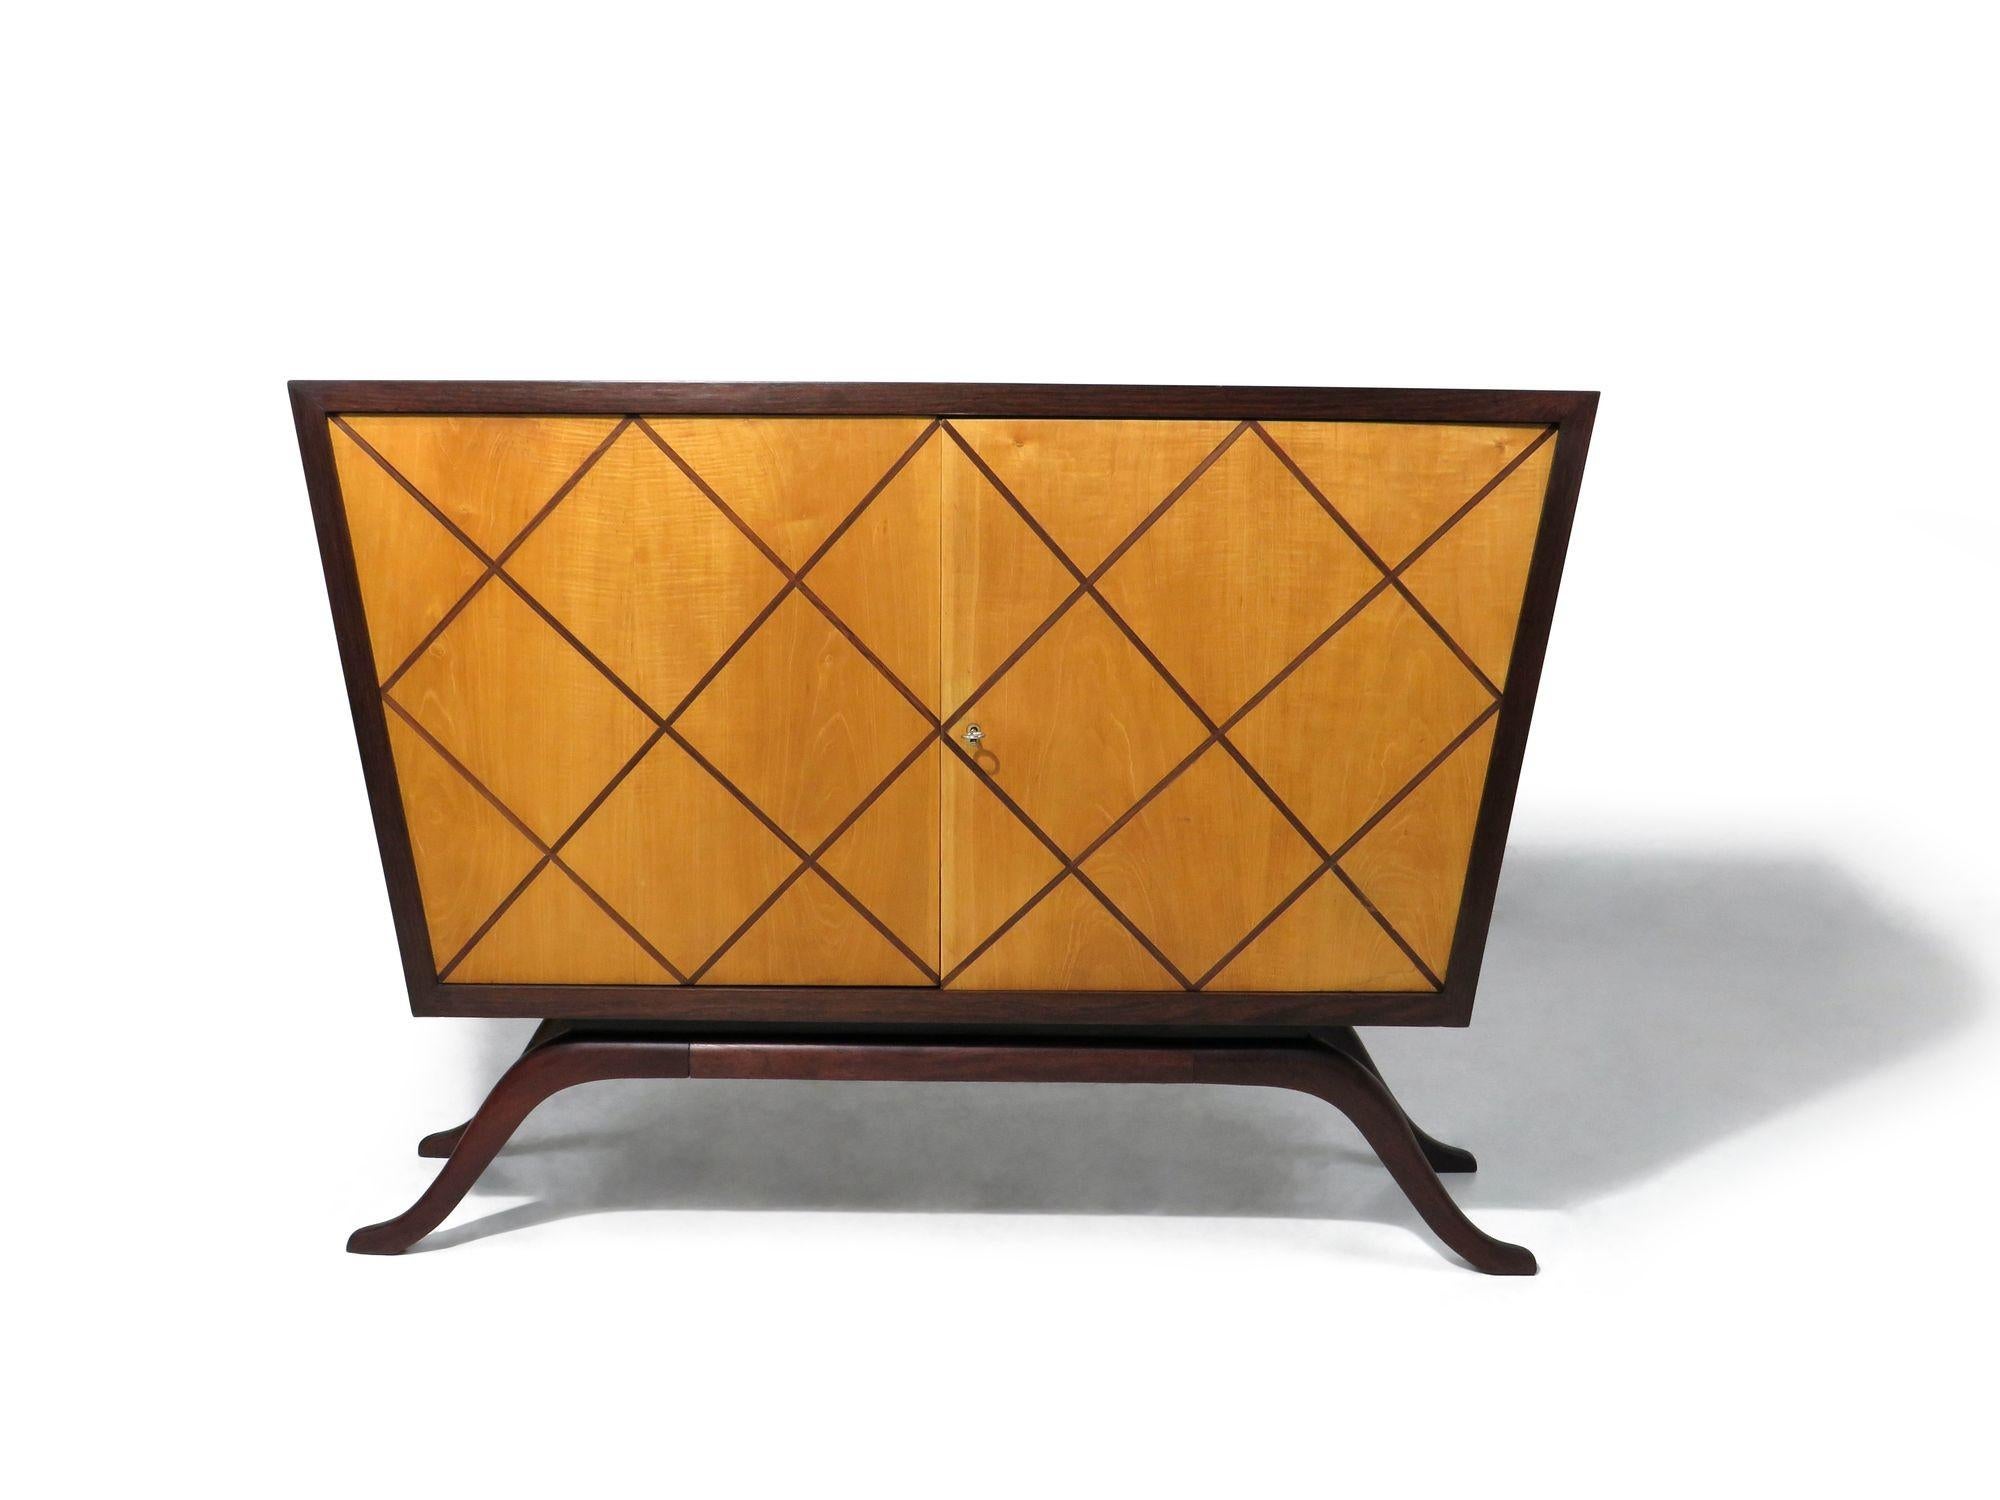 Brazilian bar cabinet designed by Guiseppi Scapinelli crafted of a dark rosewood frame, locking Pau Marfim doors with inlaid diamond pattern of rosewood and raised on dramatic curved legs of solid Brazilian rosewood. This unique, and rare cabinet